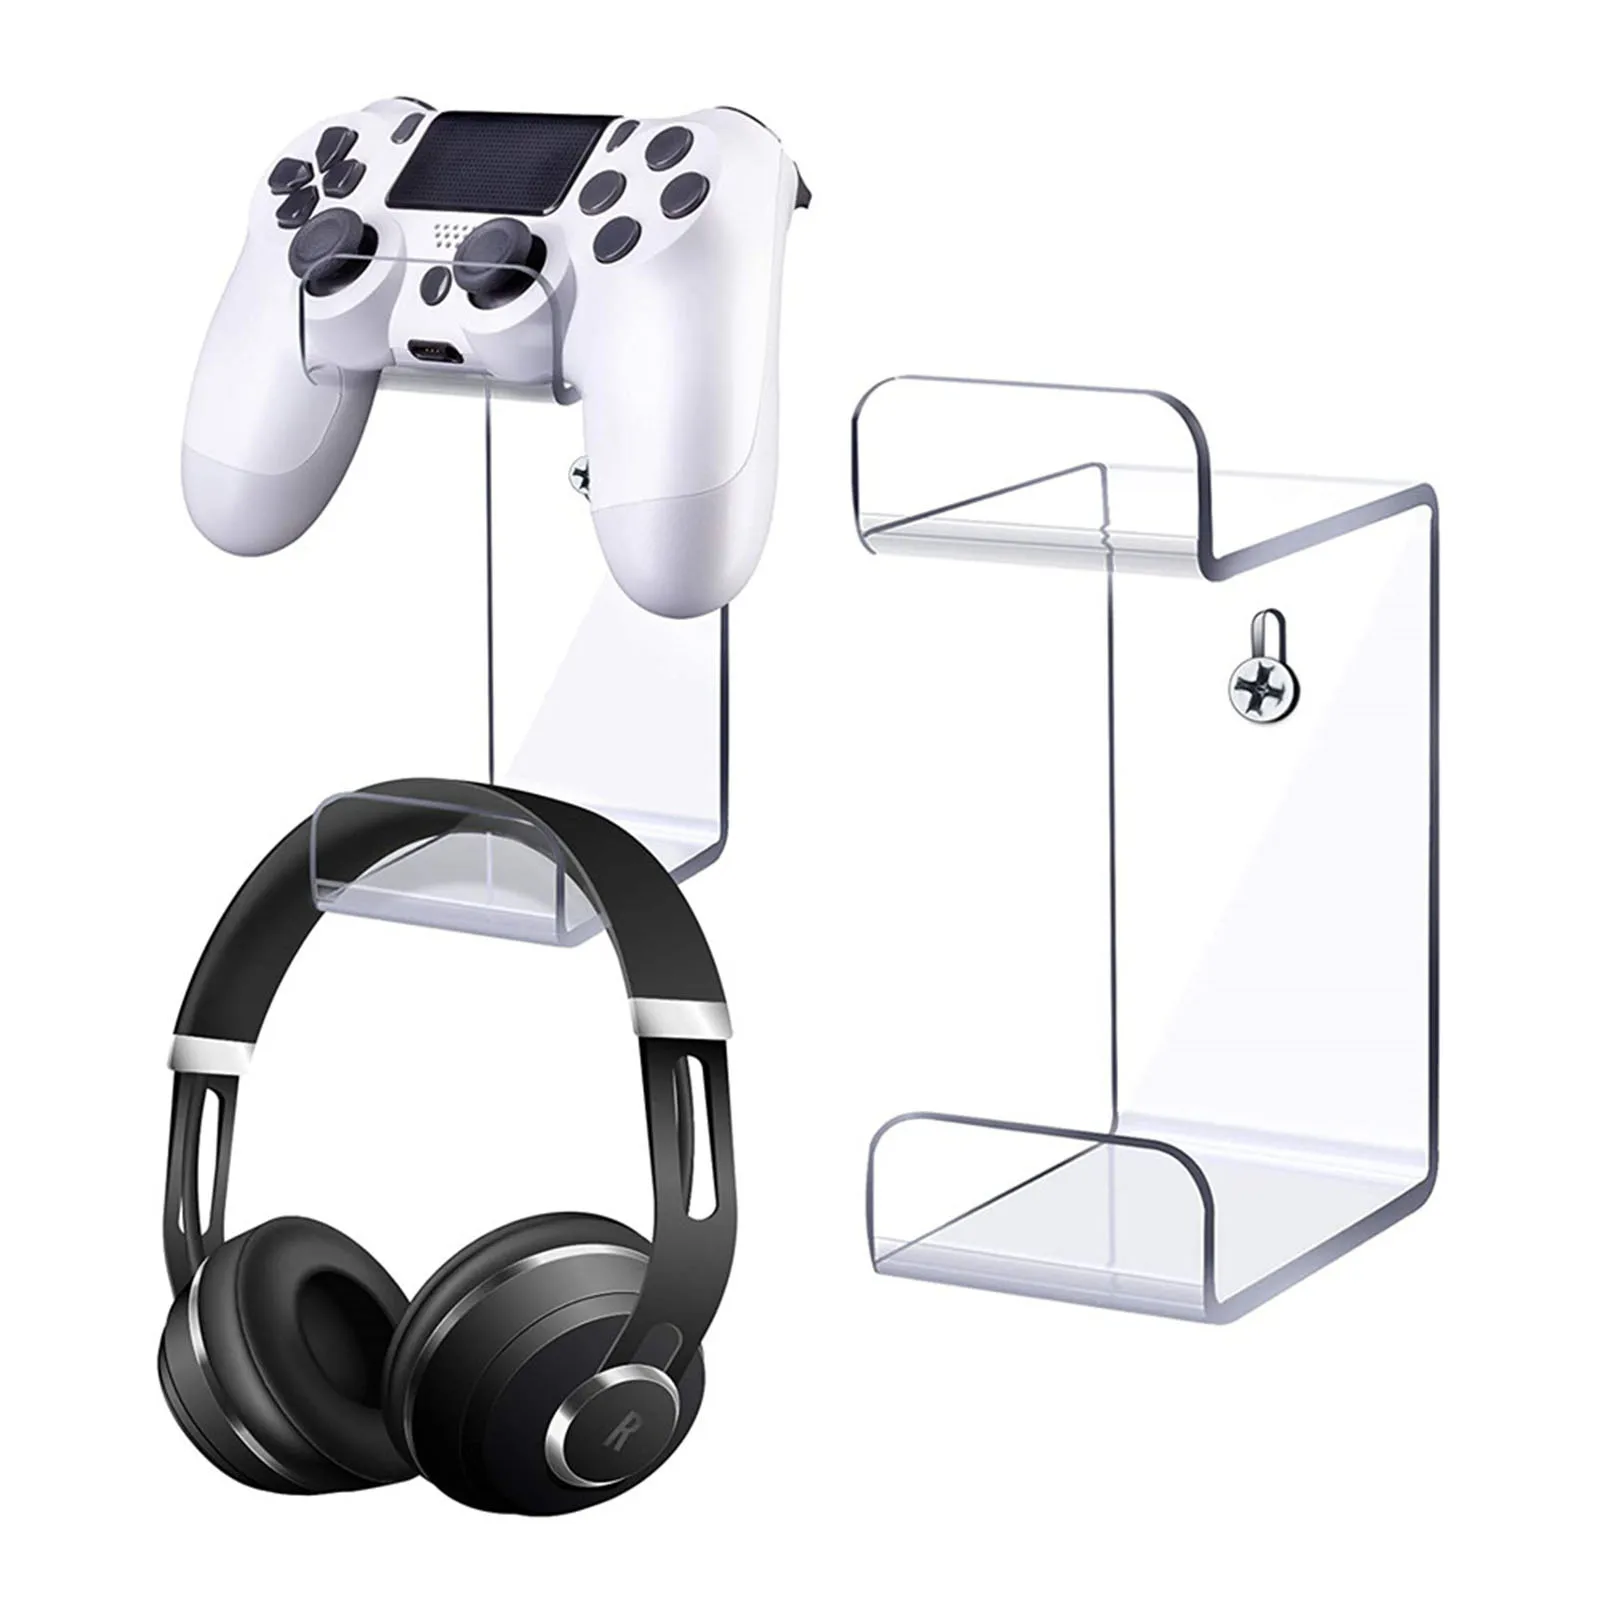 

Acrylic Wall Mount Headphone Holder Hanger For PS5 XBOX Controllers Accessories Headset Stand Earphone Bracket Hanging Hook